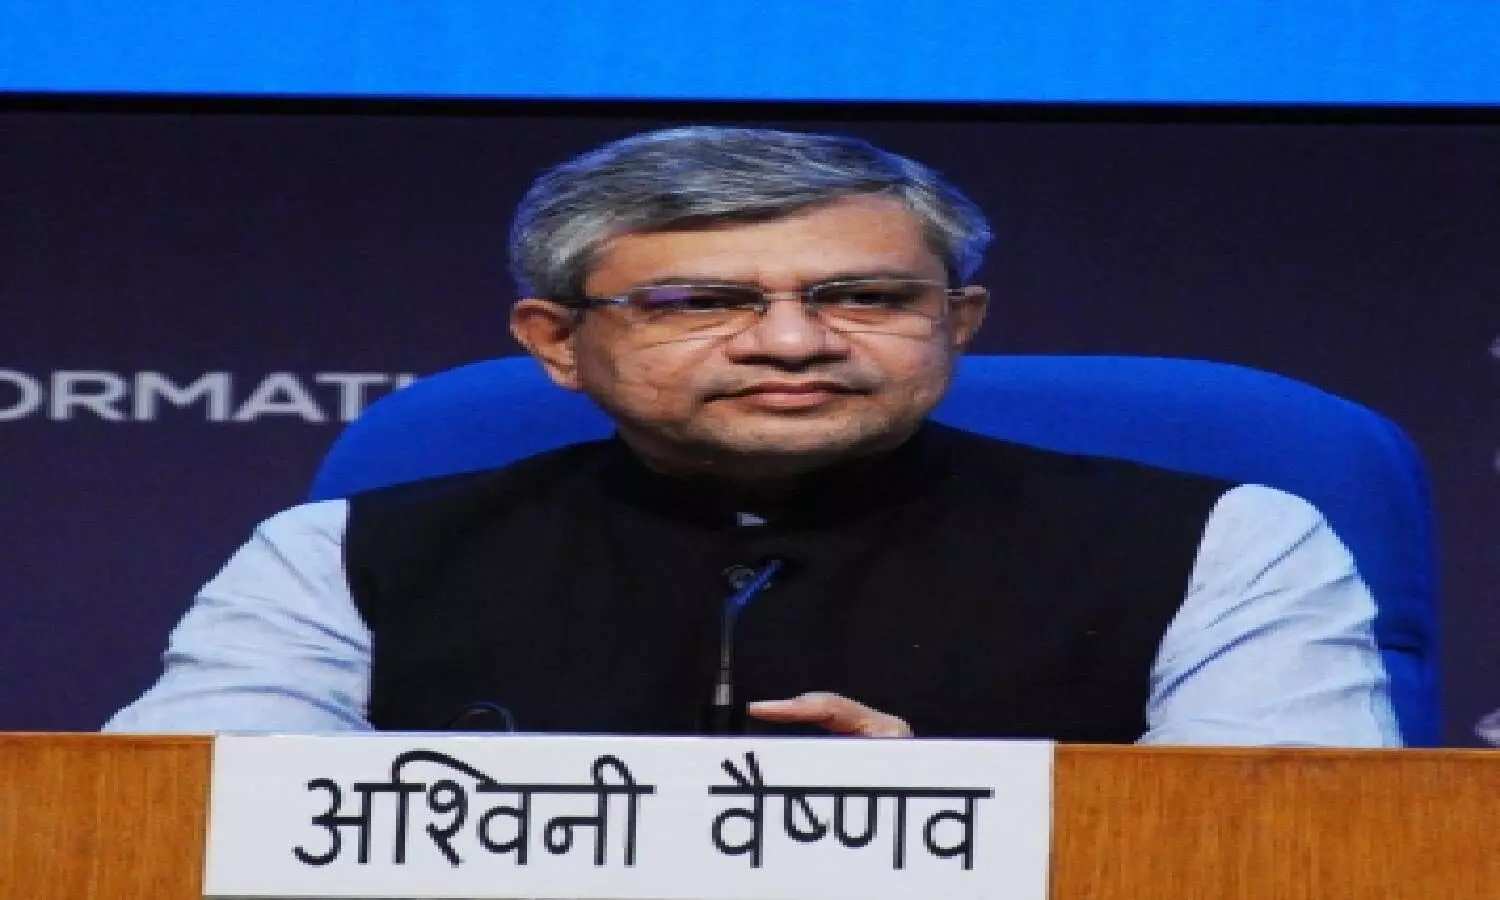 Reforms to change framework of Indian telecom sector: Minister